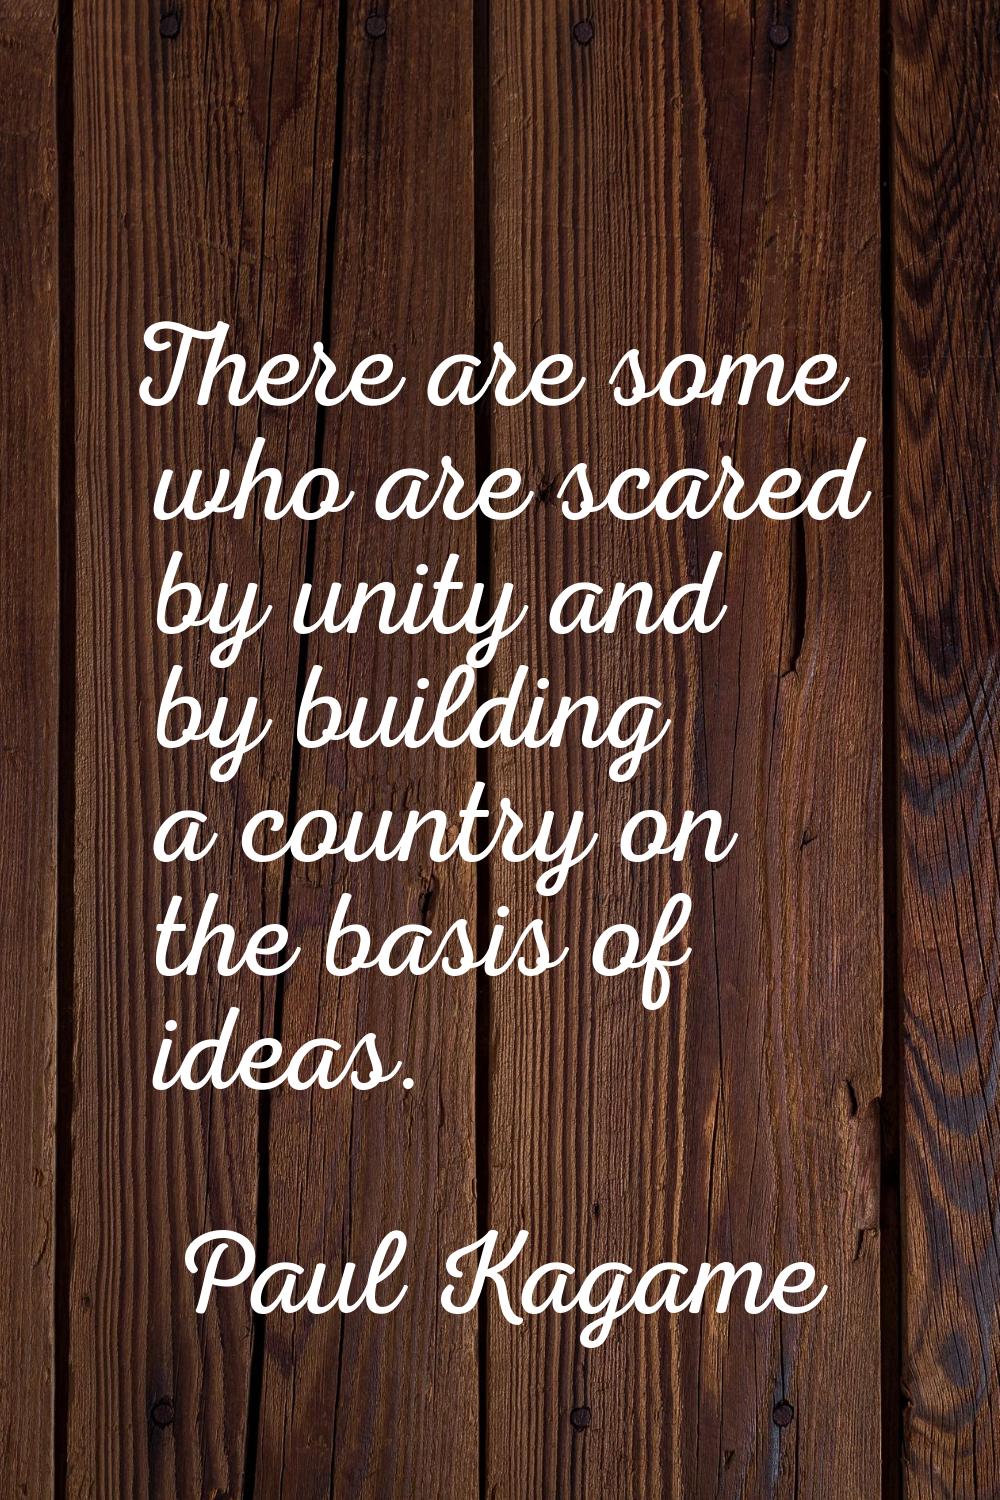 There are some who are scared by unity and by building a country on the basis of ideas.